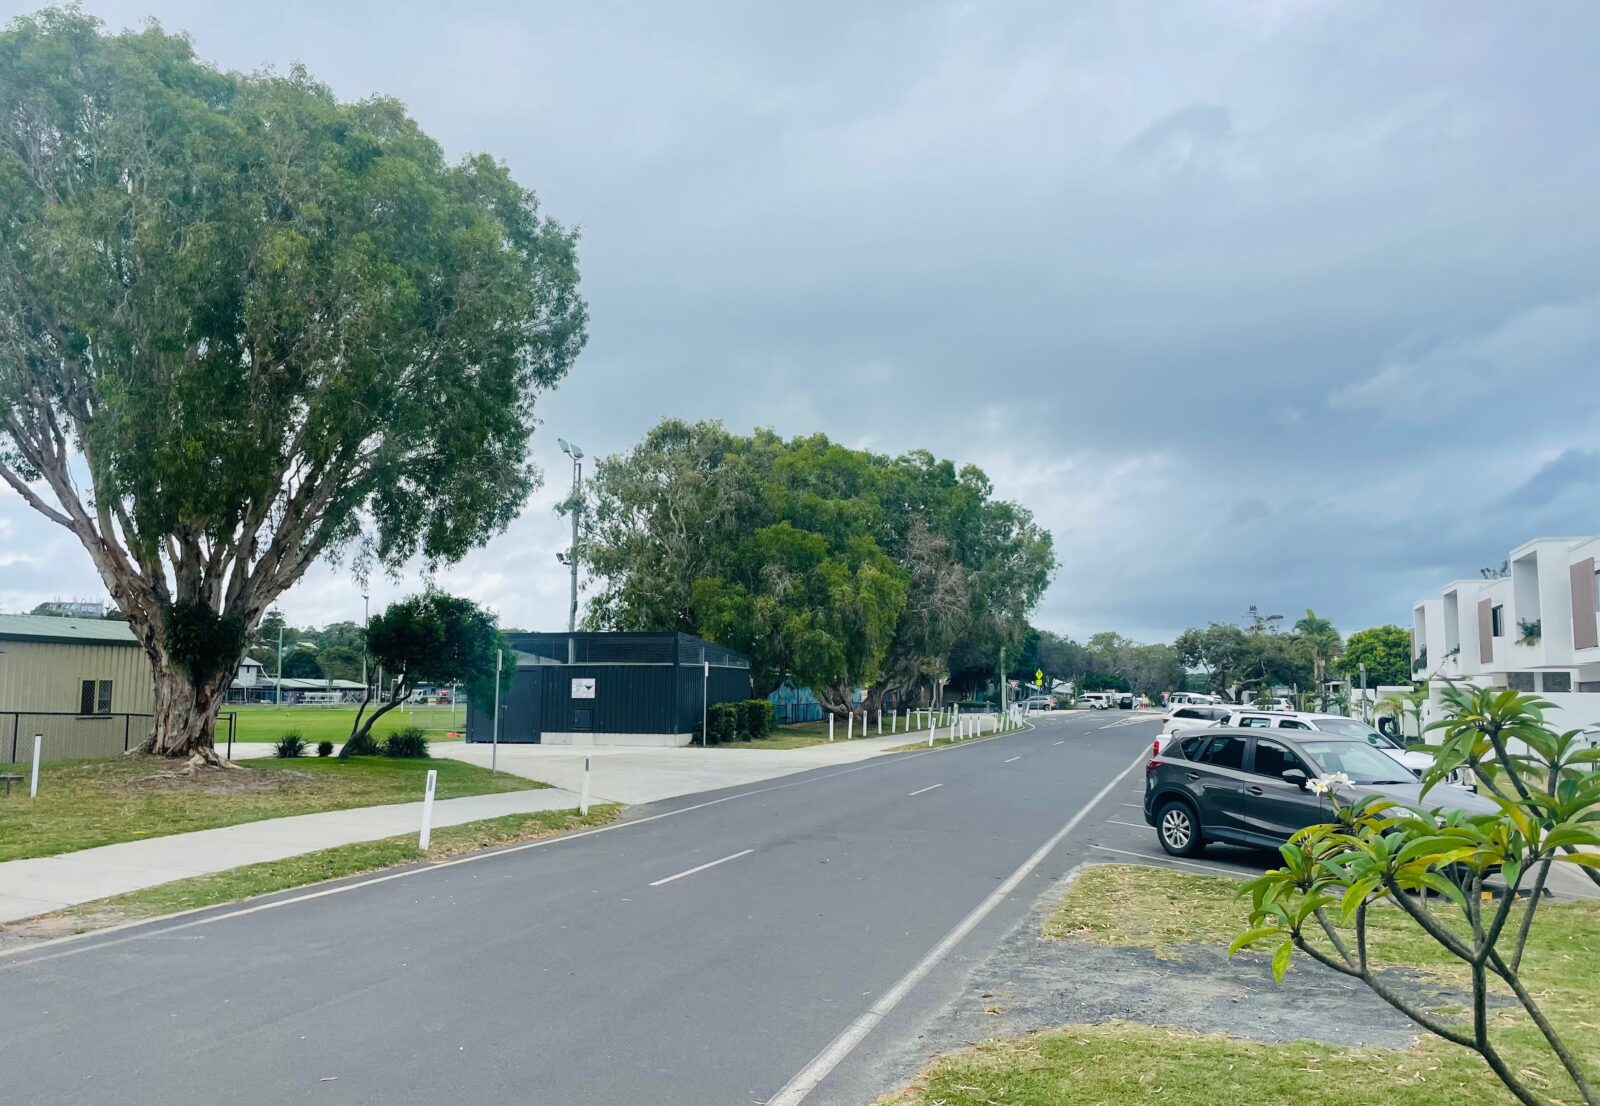 Enjoy 4-hour paid parking at the Byron Bay Recreation Grounds